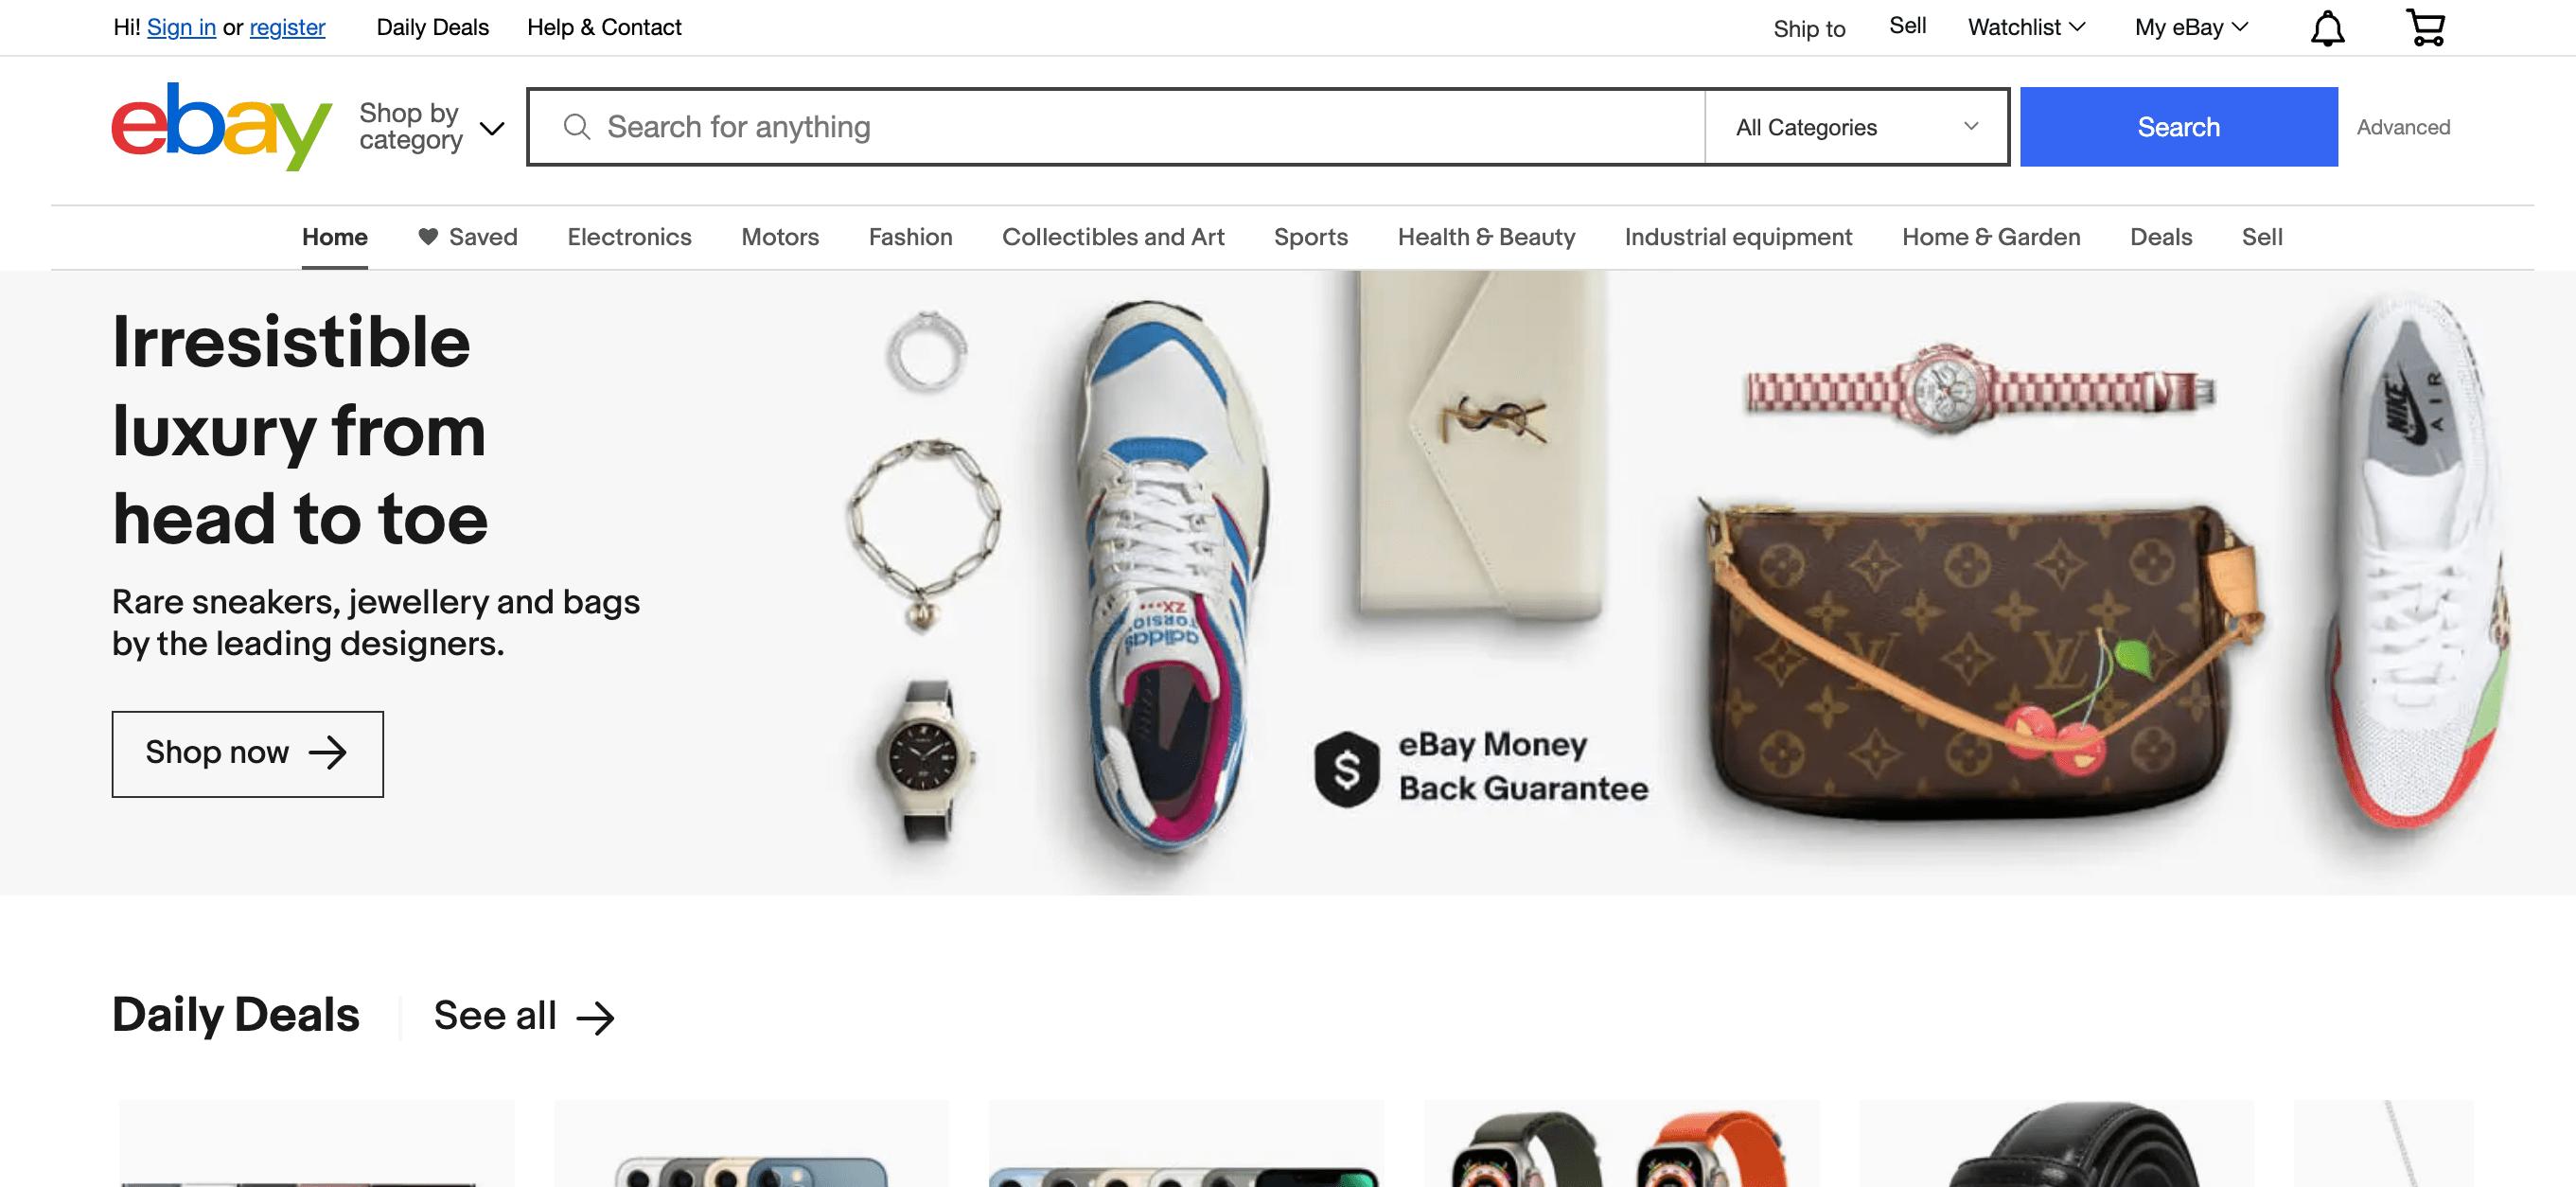 how to create an online marketplace like eBay